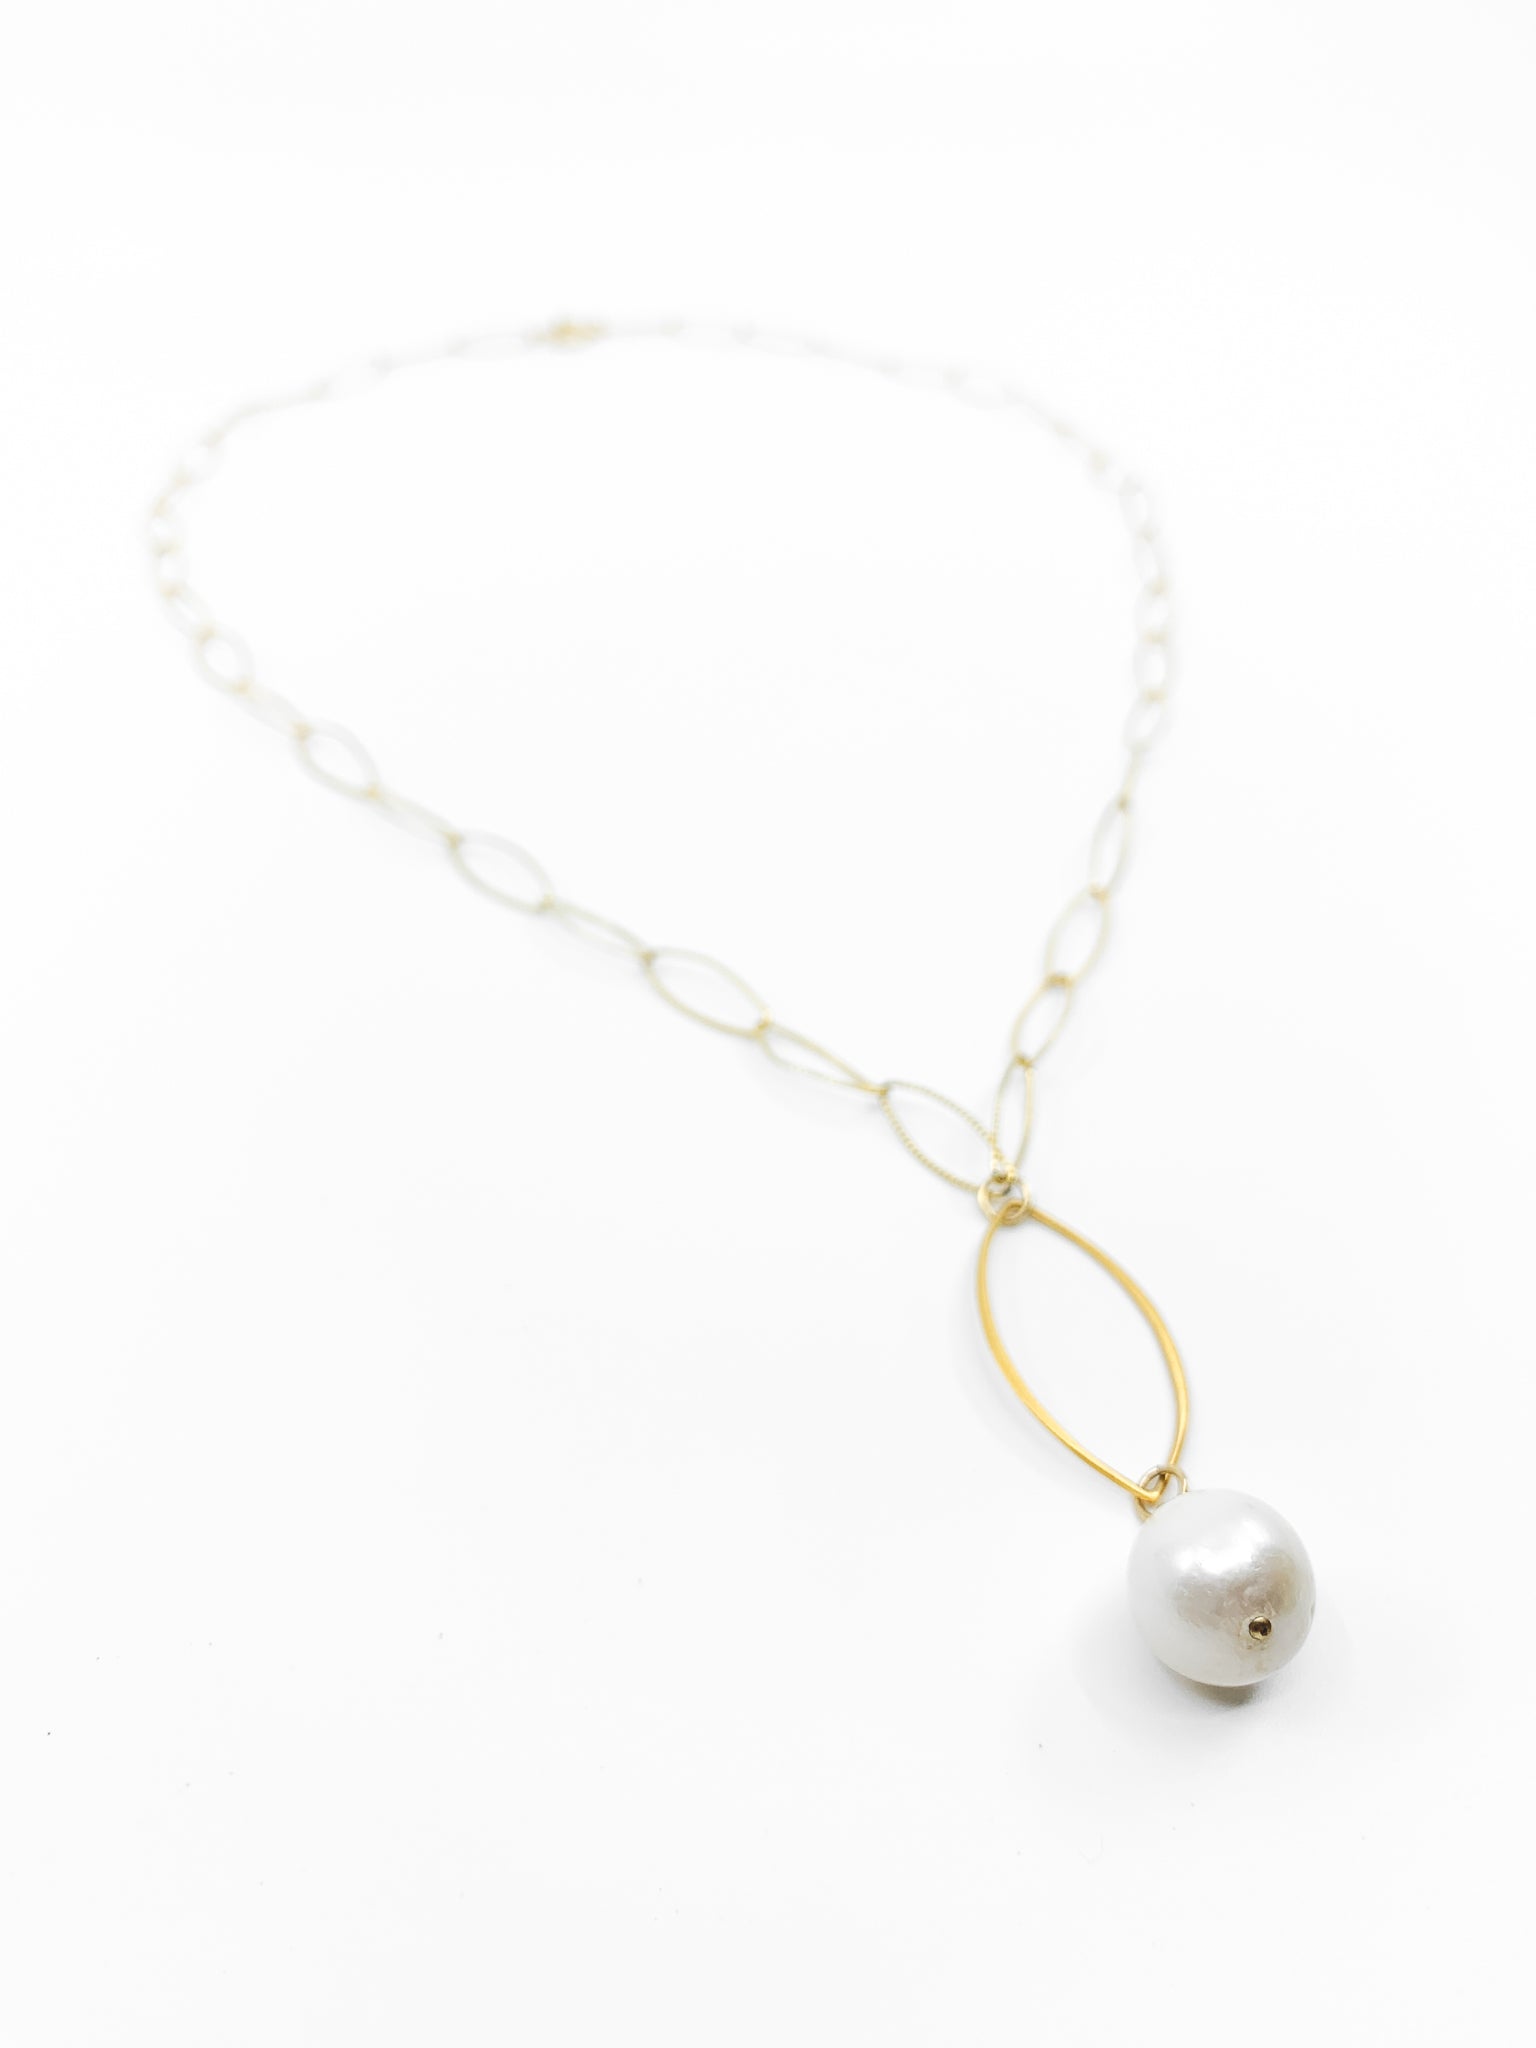 white pearl marquee gold chain necklace by eve black jewelry made in Hawaii